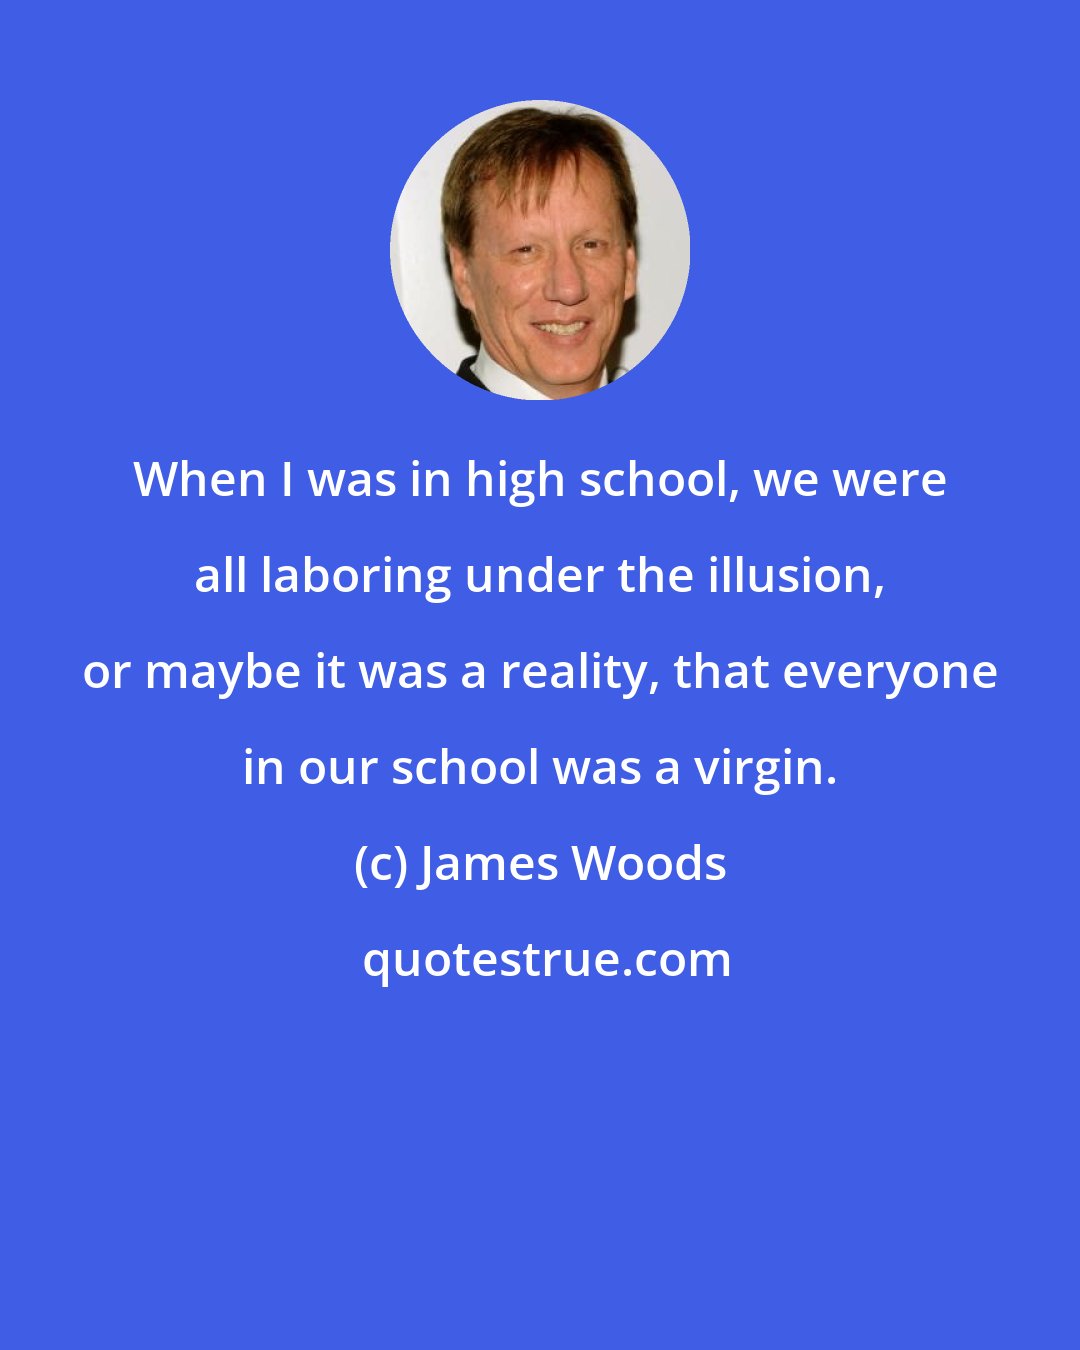 James Woods: When I was in high school, we were all laboring under the illusion, or maybe it was a reality, that everyone in our school was a virgin.